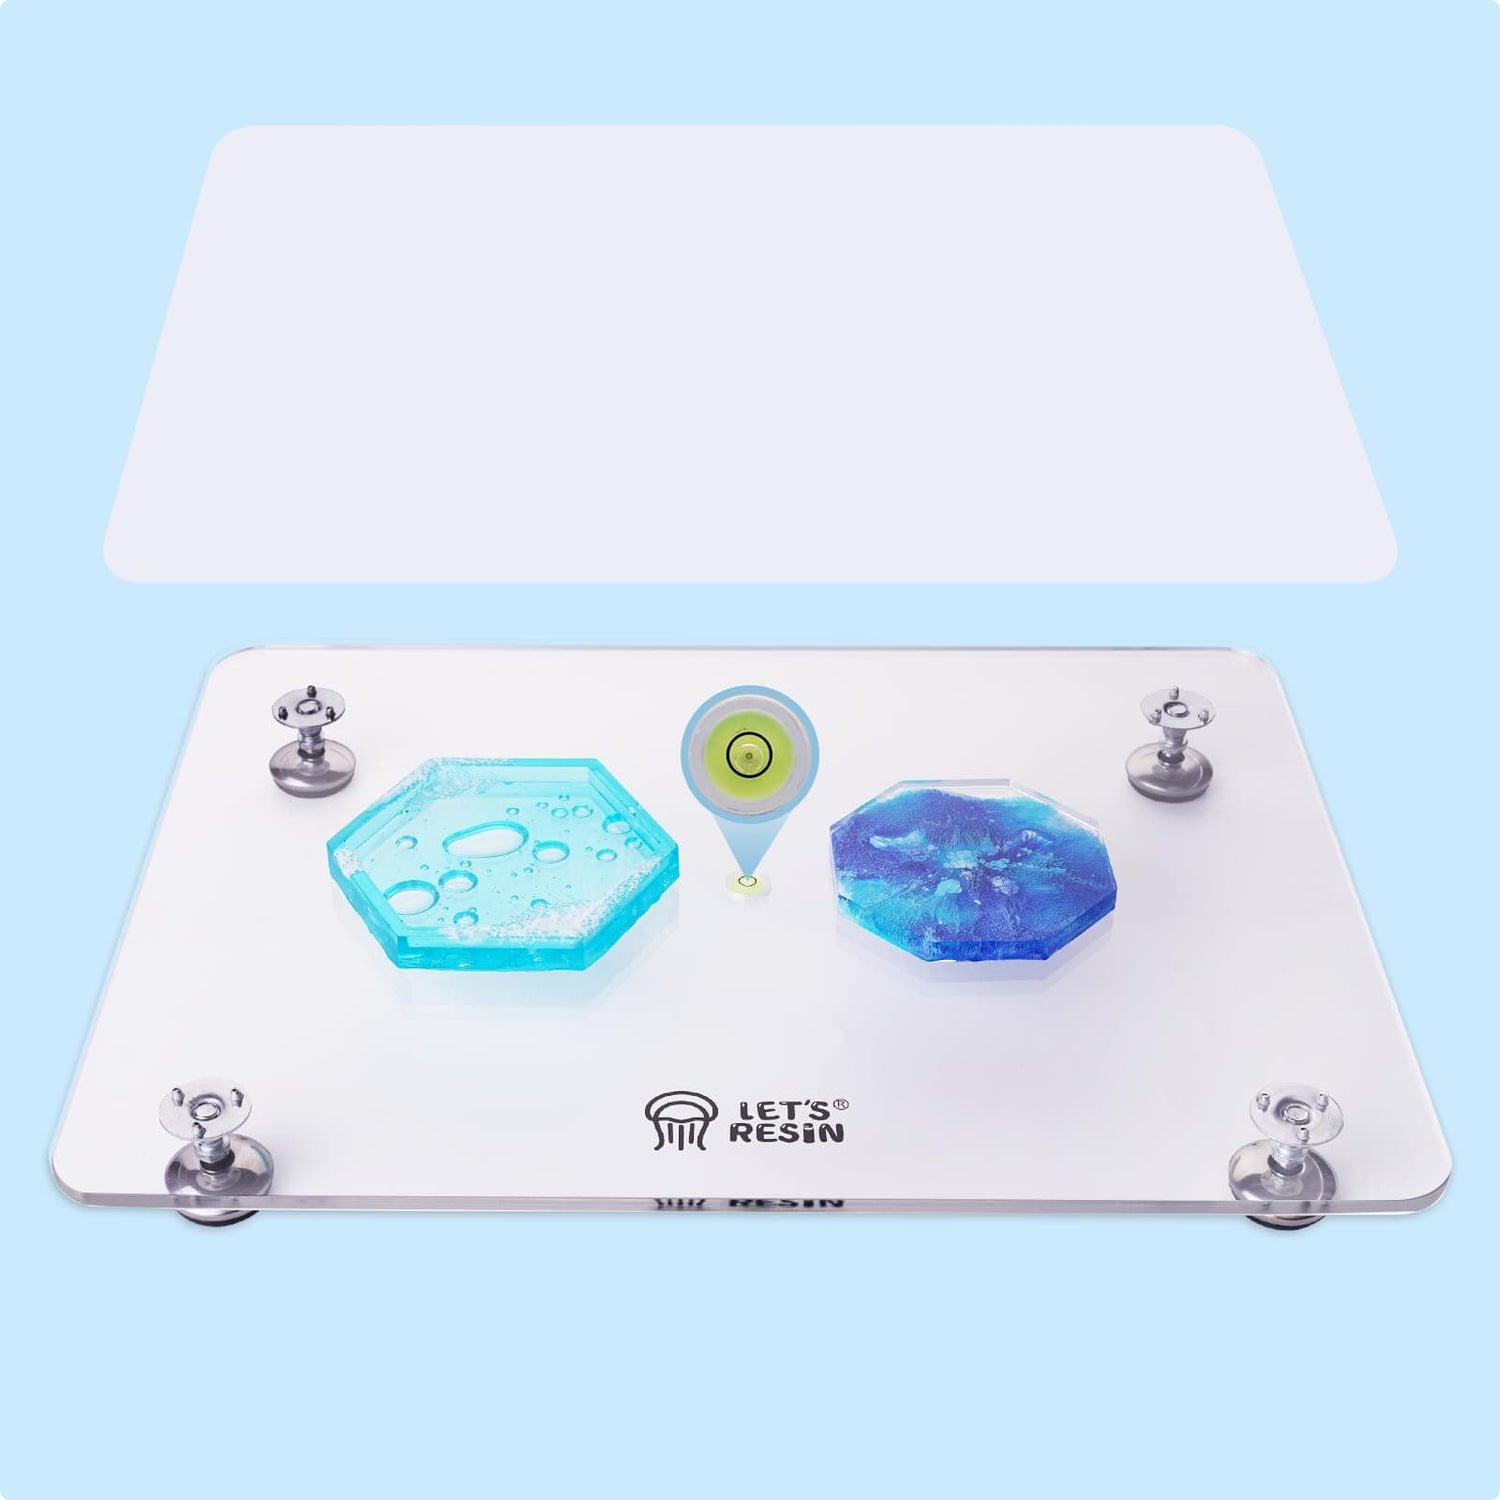 Anti Slip Resin Leveling Board with Adjustable Height and Tilt Adjustable  Epoxy Resin Leveling Board Resin Leveling Table Tools - AliExpress